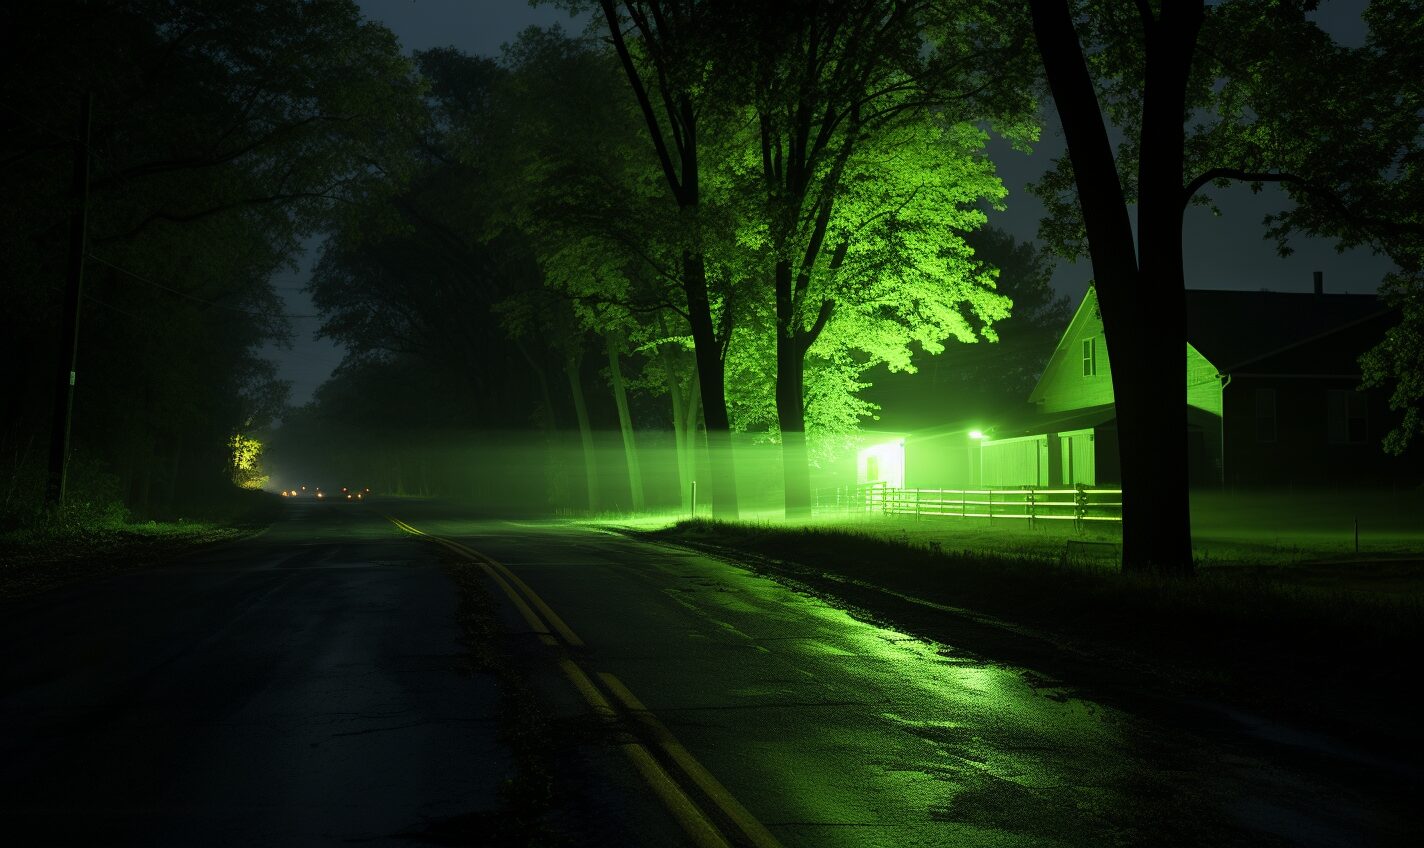 rockford, illinois in black and neon green glow